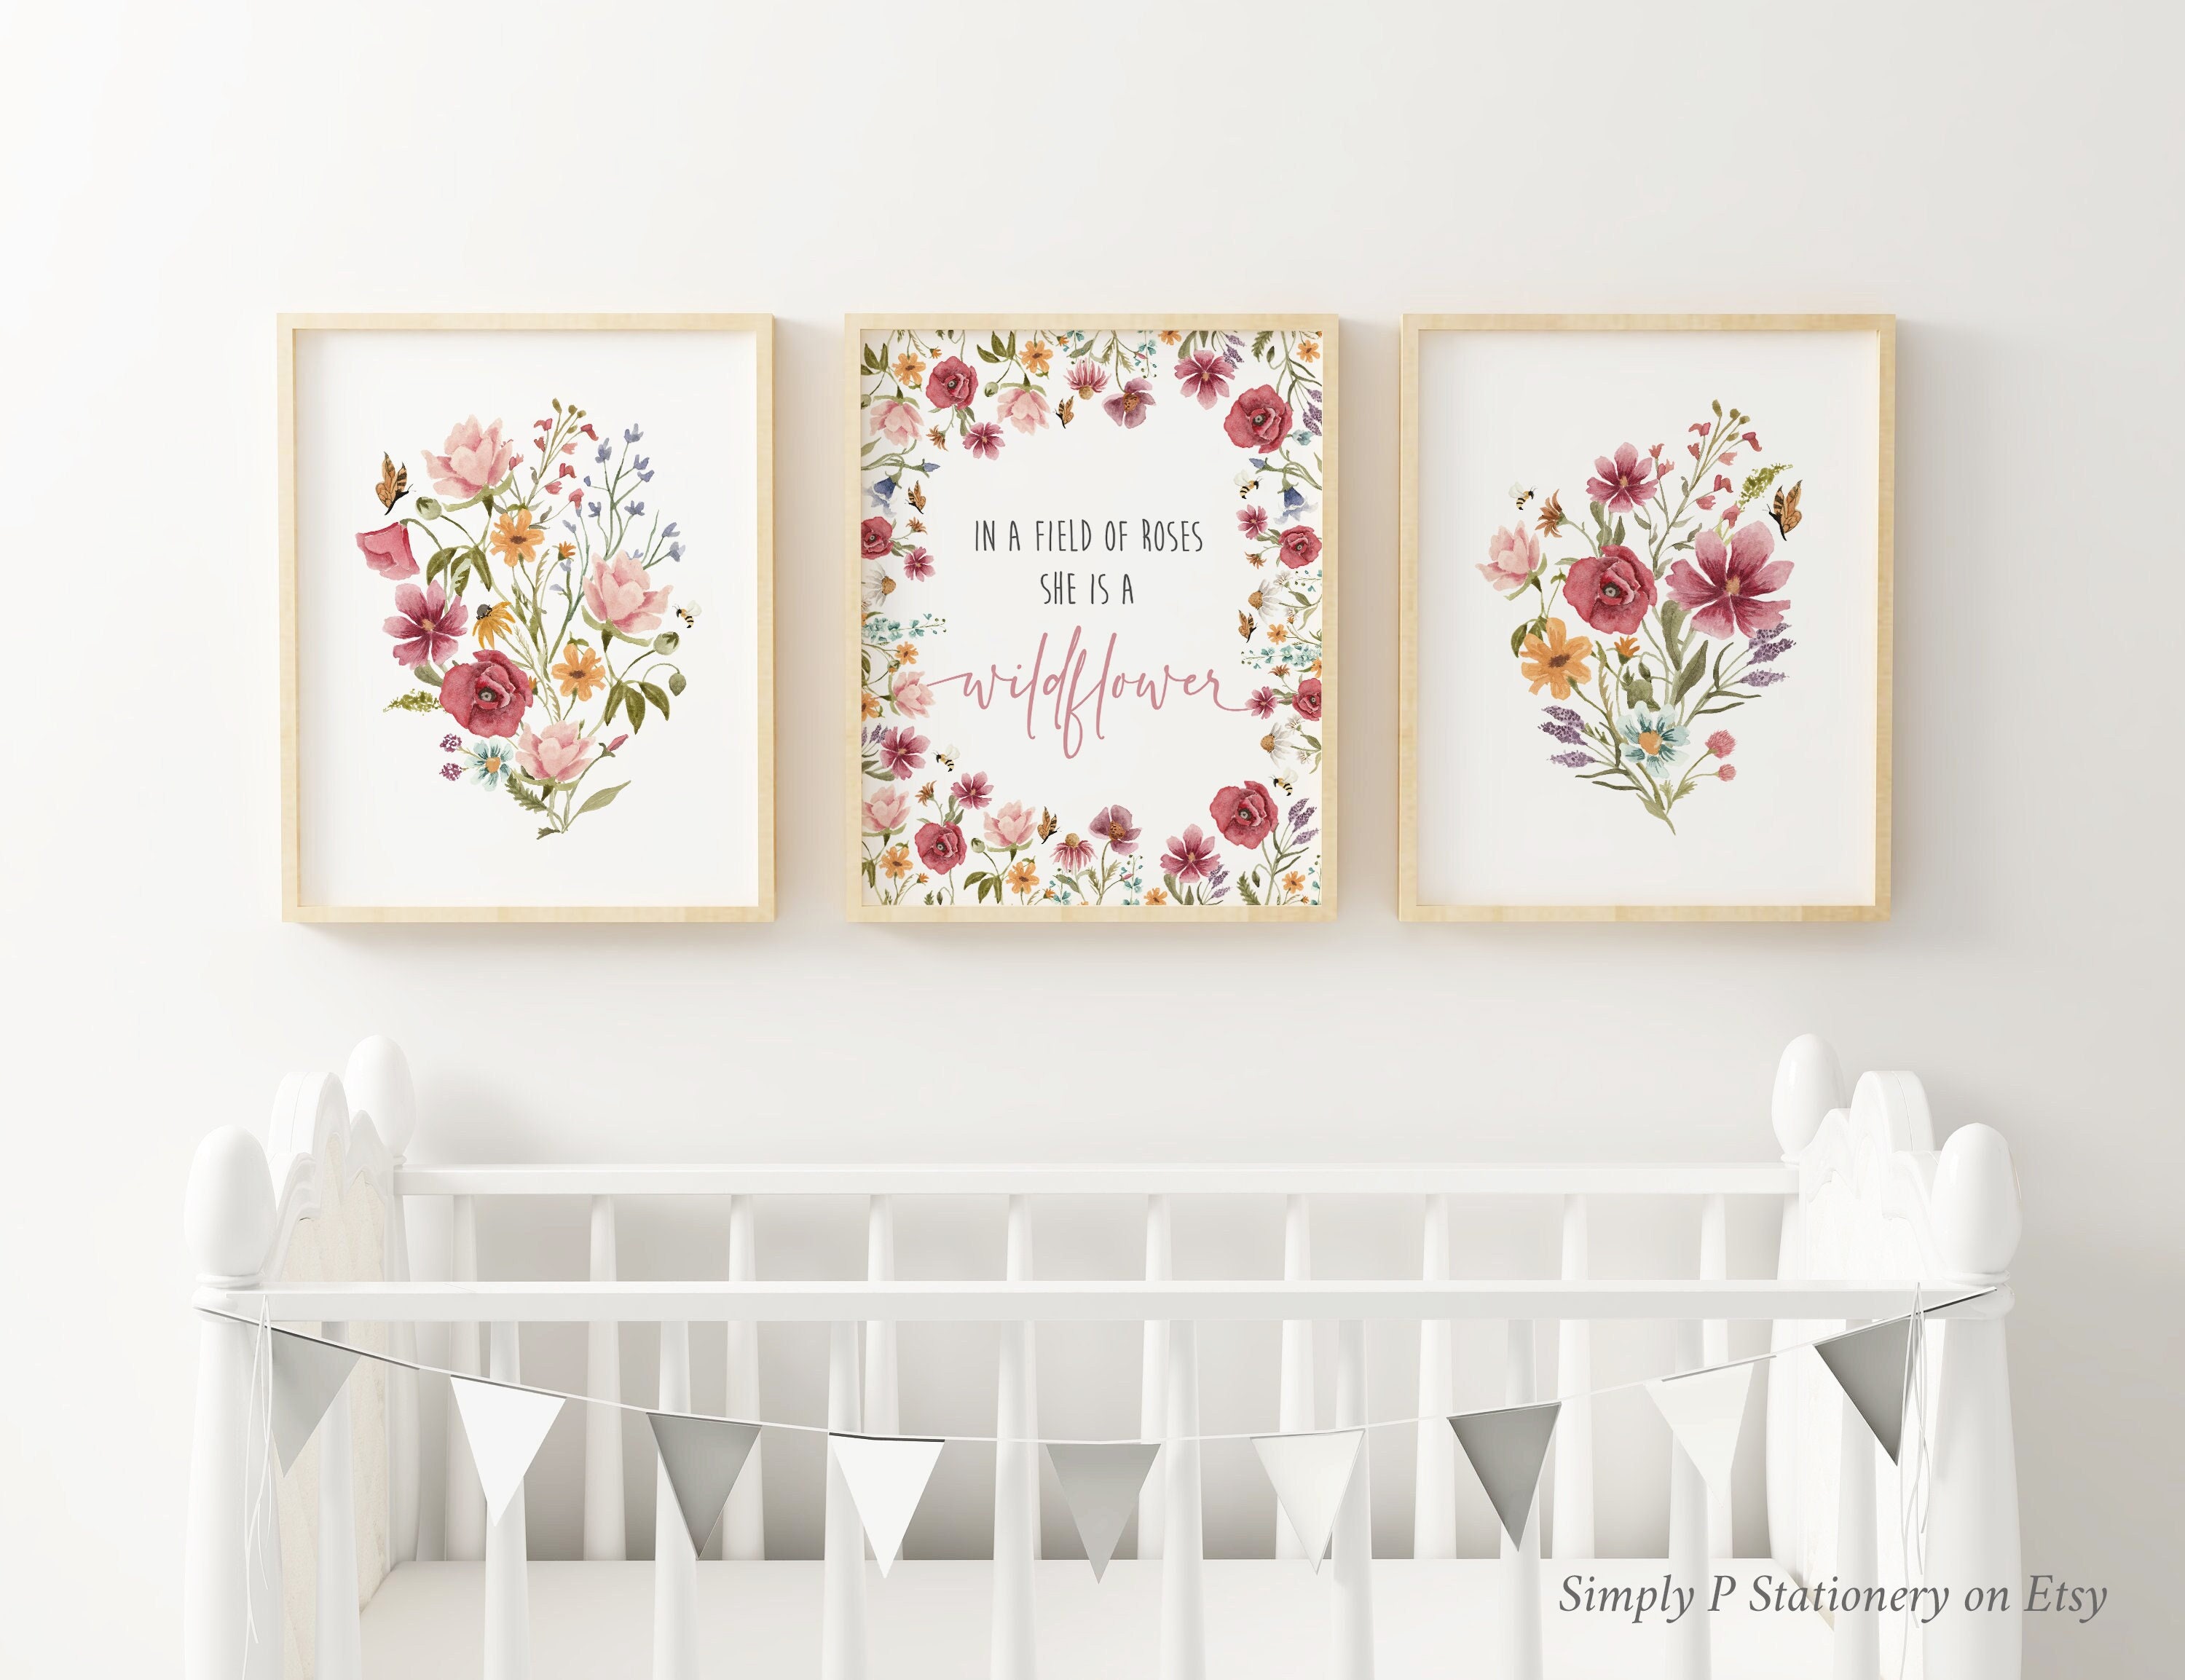 In A Field of Roses She is A Wildflower Watercolour Flower Print,  Wildflower Wall Art, Florals and Bees Watercolor Design, Nursery Art 